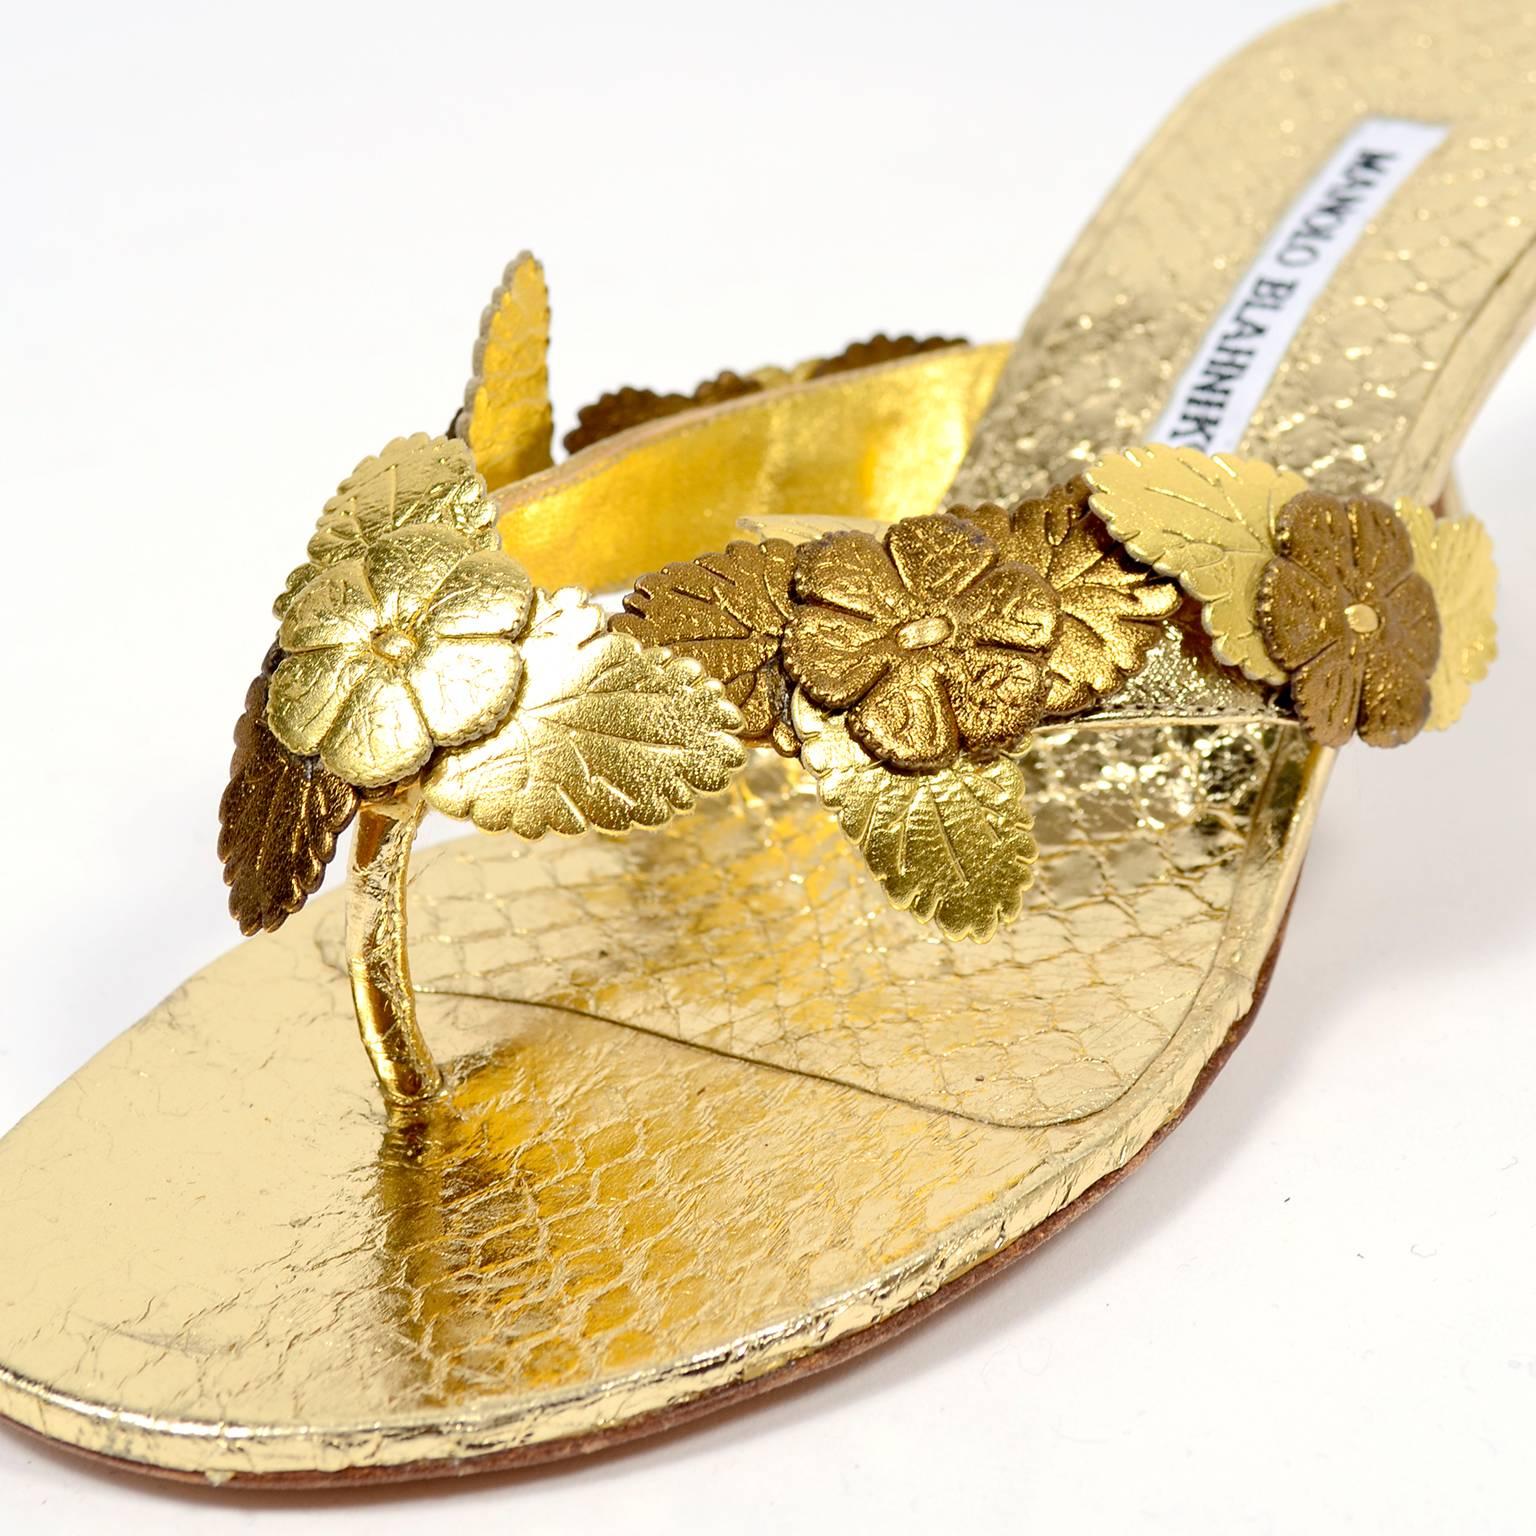 This is a pair of Manolo Blahnik shoes in a reptile embossed metallic gold leather with decorative cut flowers. These beautiful vintage Manolo Blahnik slip on shoes appear to have only been worn once and are labeled a size 37.  The shoes are sandal